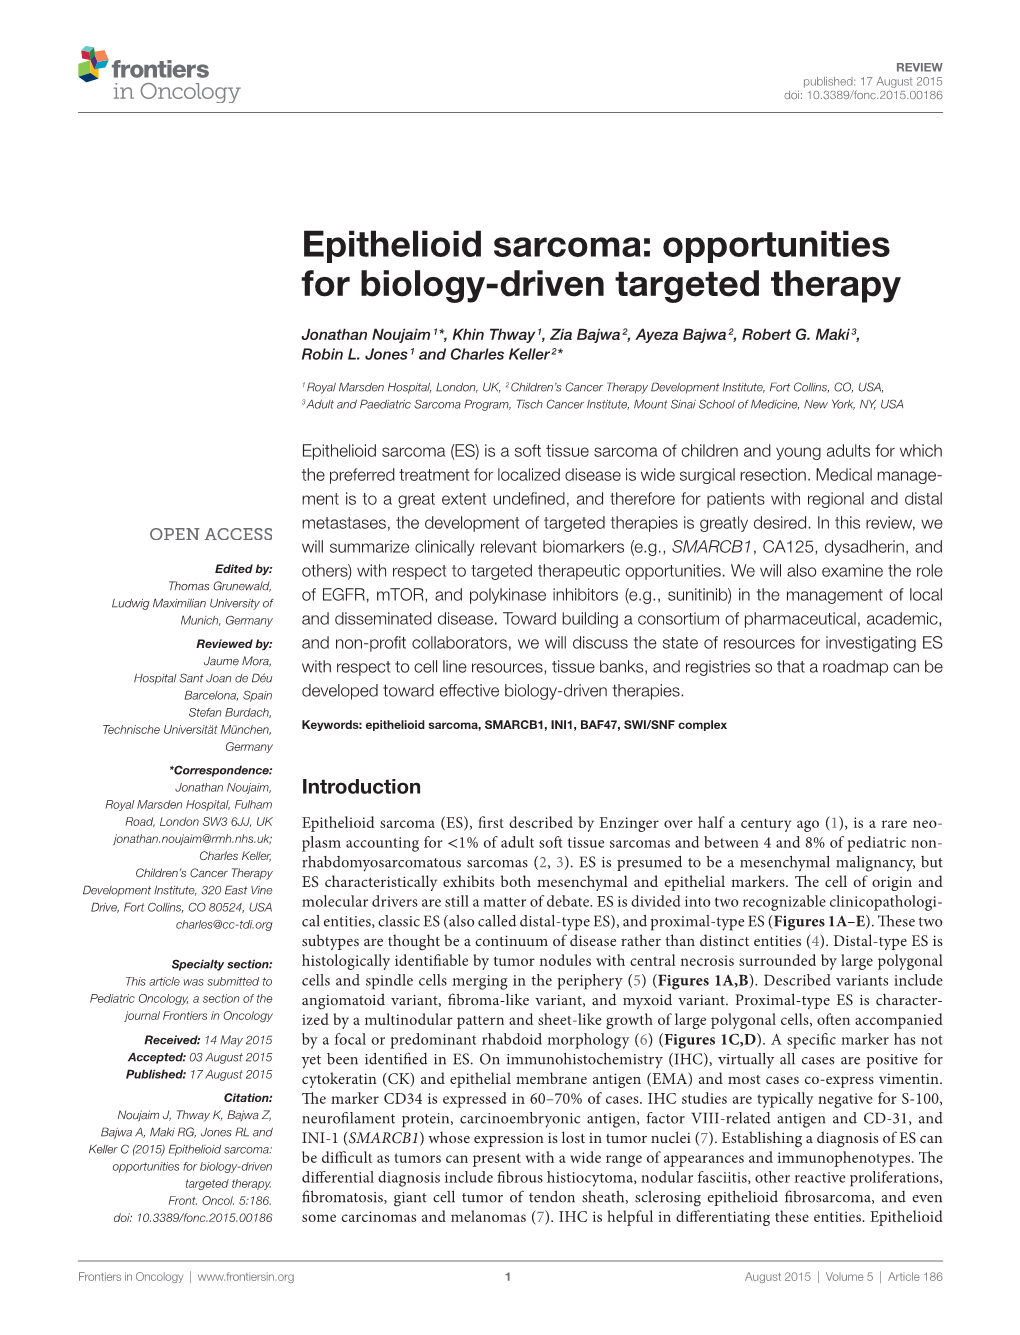 Epithelioid Sarcoma: Opportunities for Biology-Driven Targeted Therapy